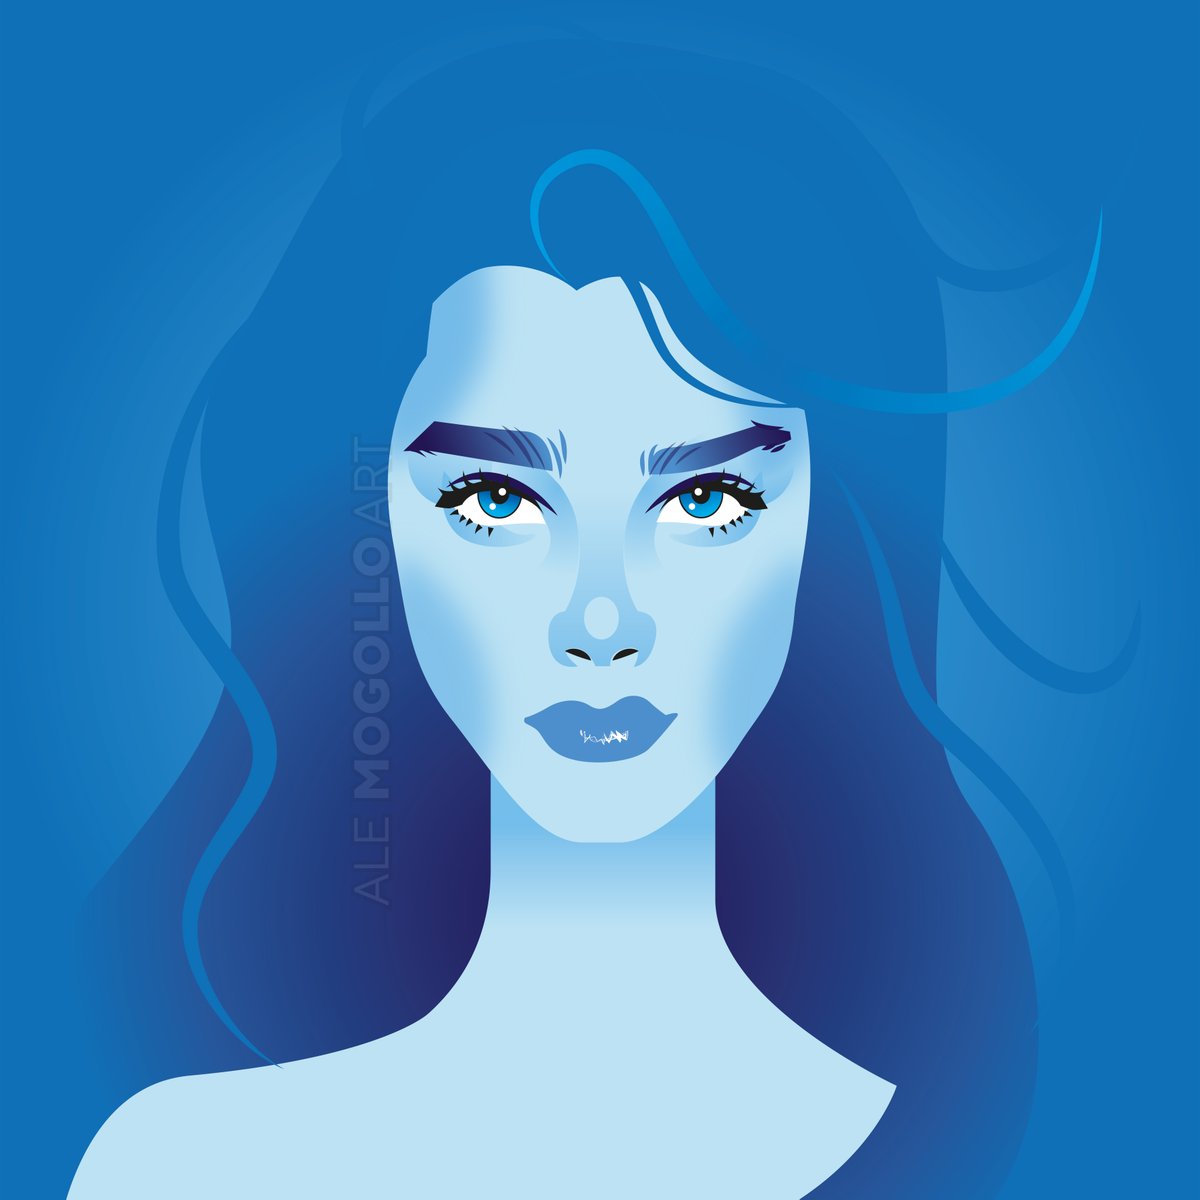 Happy birthday to the wonderful Brooke Shields, who is 59 today 💙
#brookeshields #prettybaby #thebluelagoon #icon #blue #TCMParty #alejandromogolloart